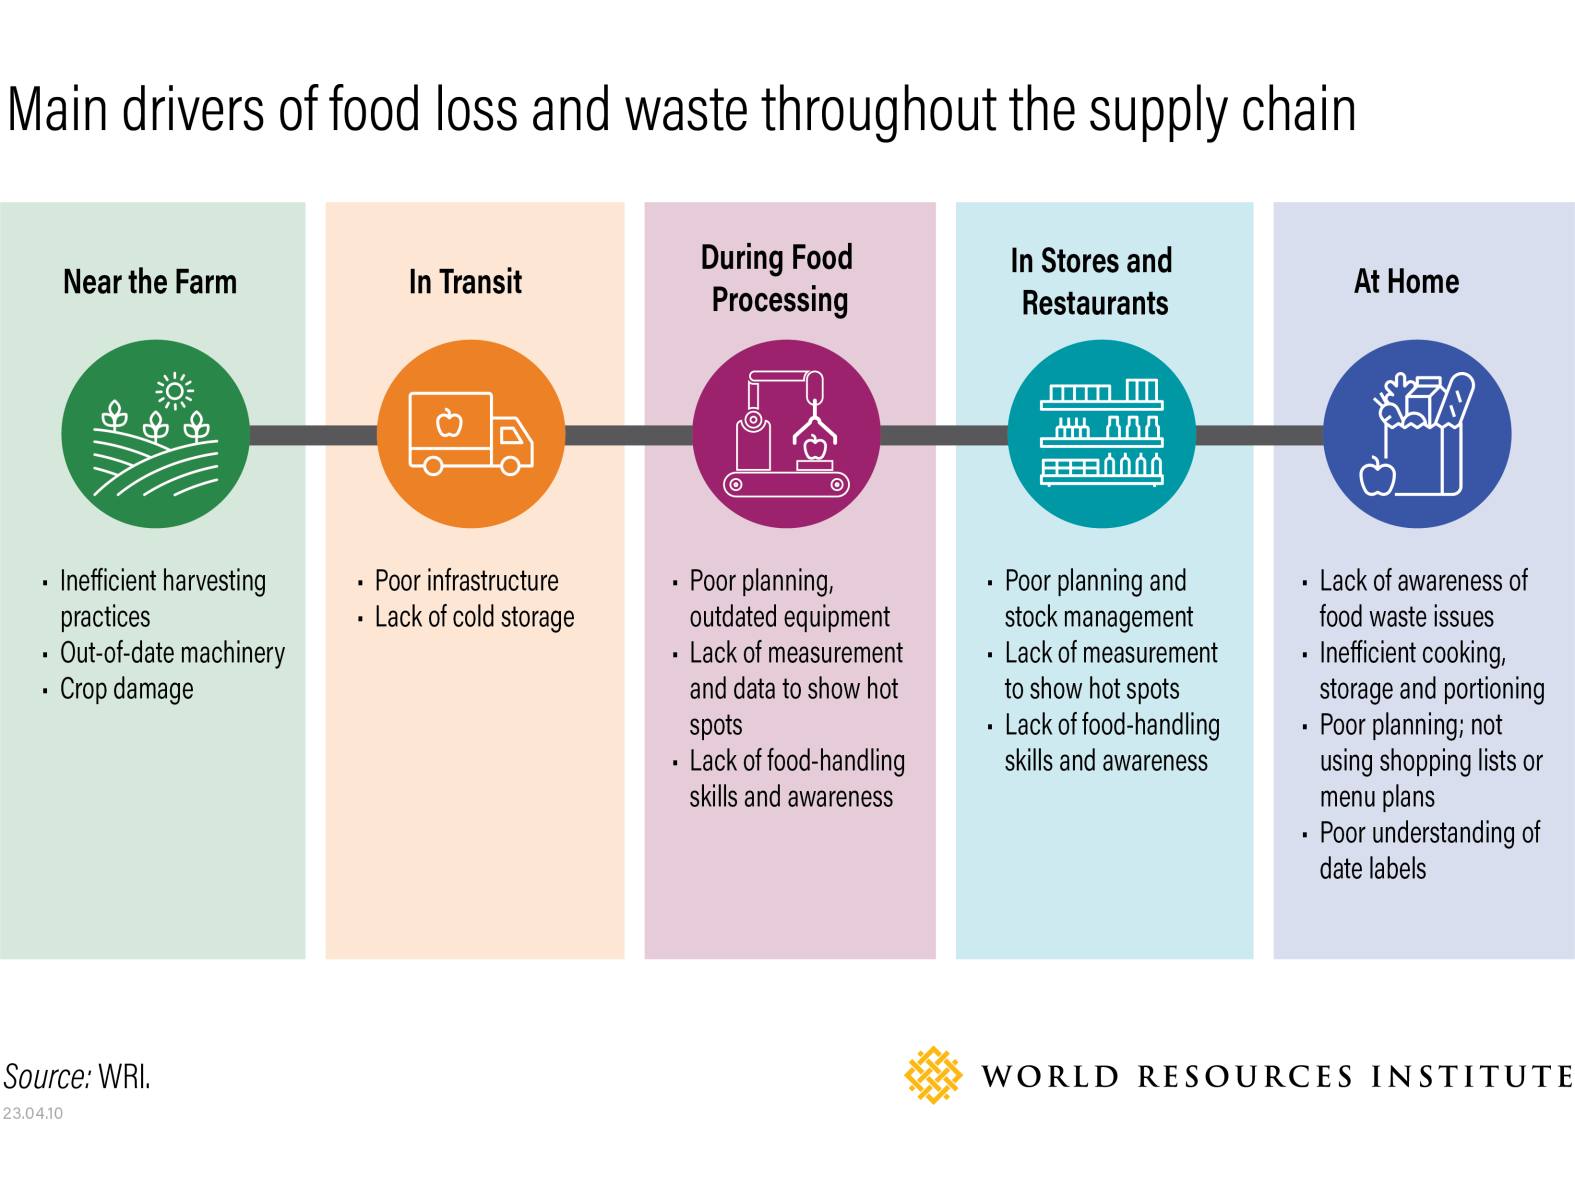 Drivers of food loss and waste throughout the supply chain